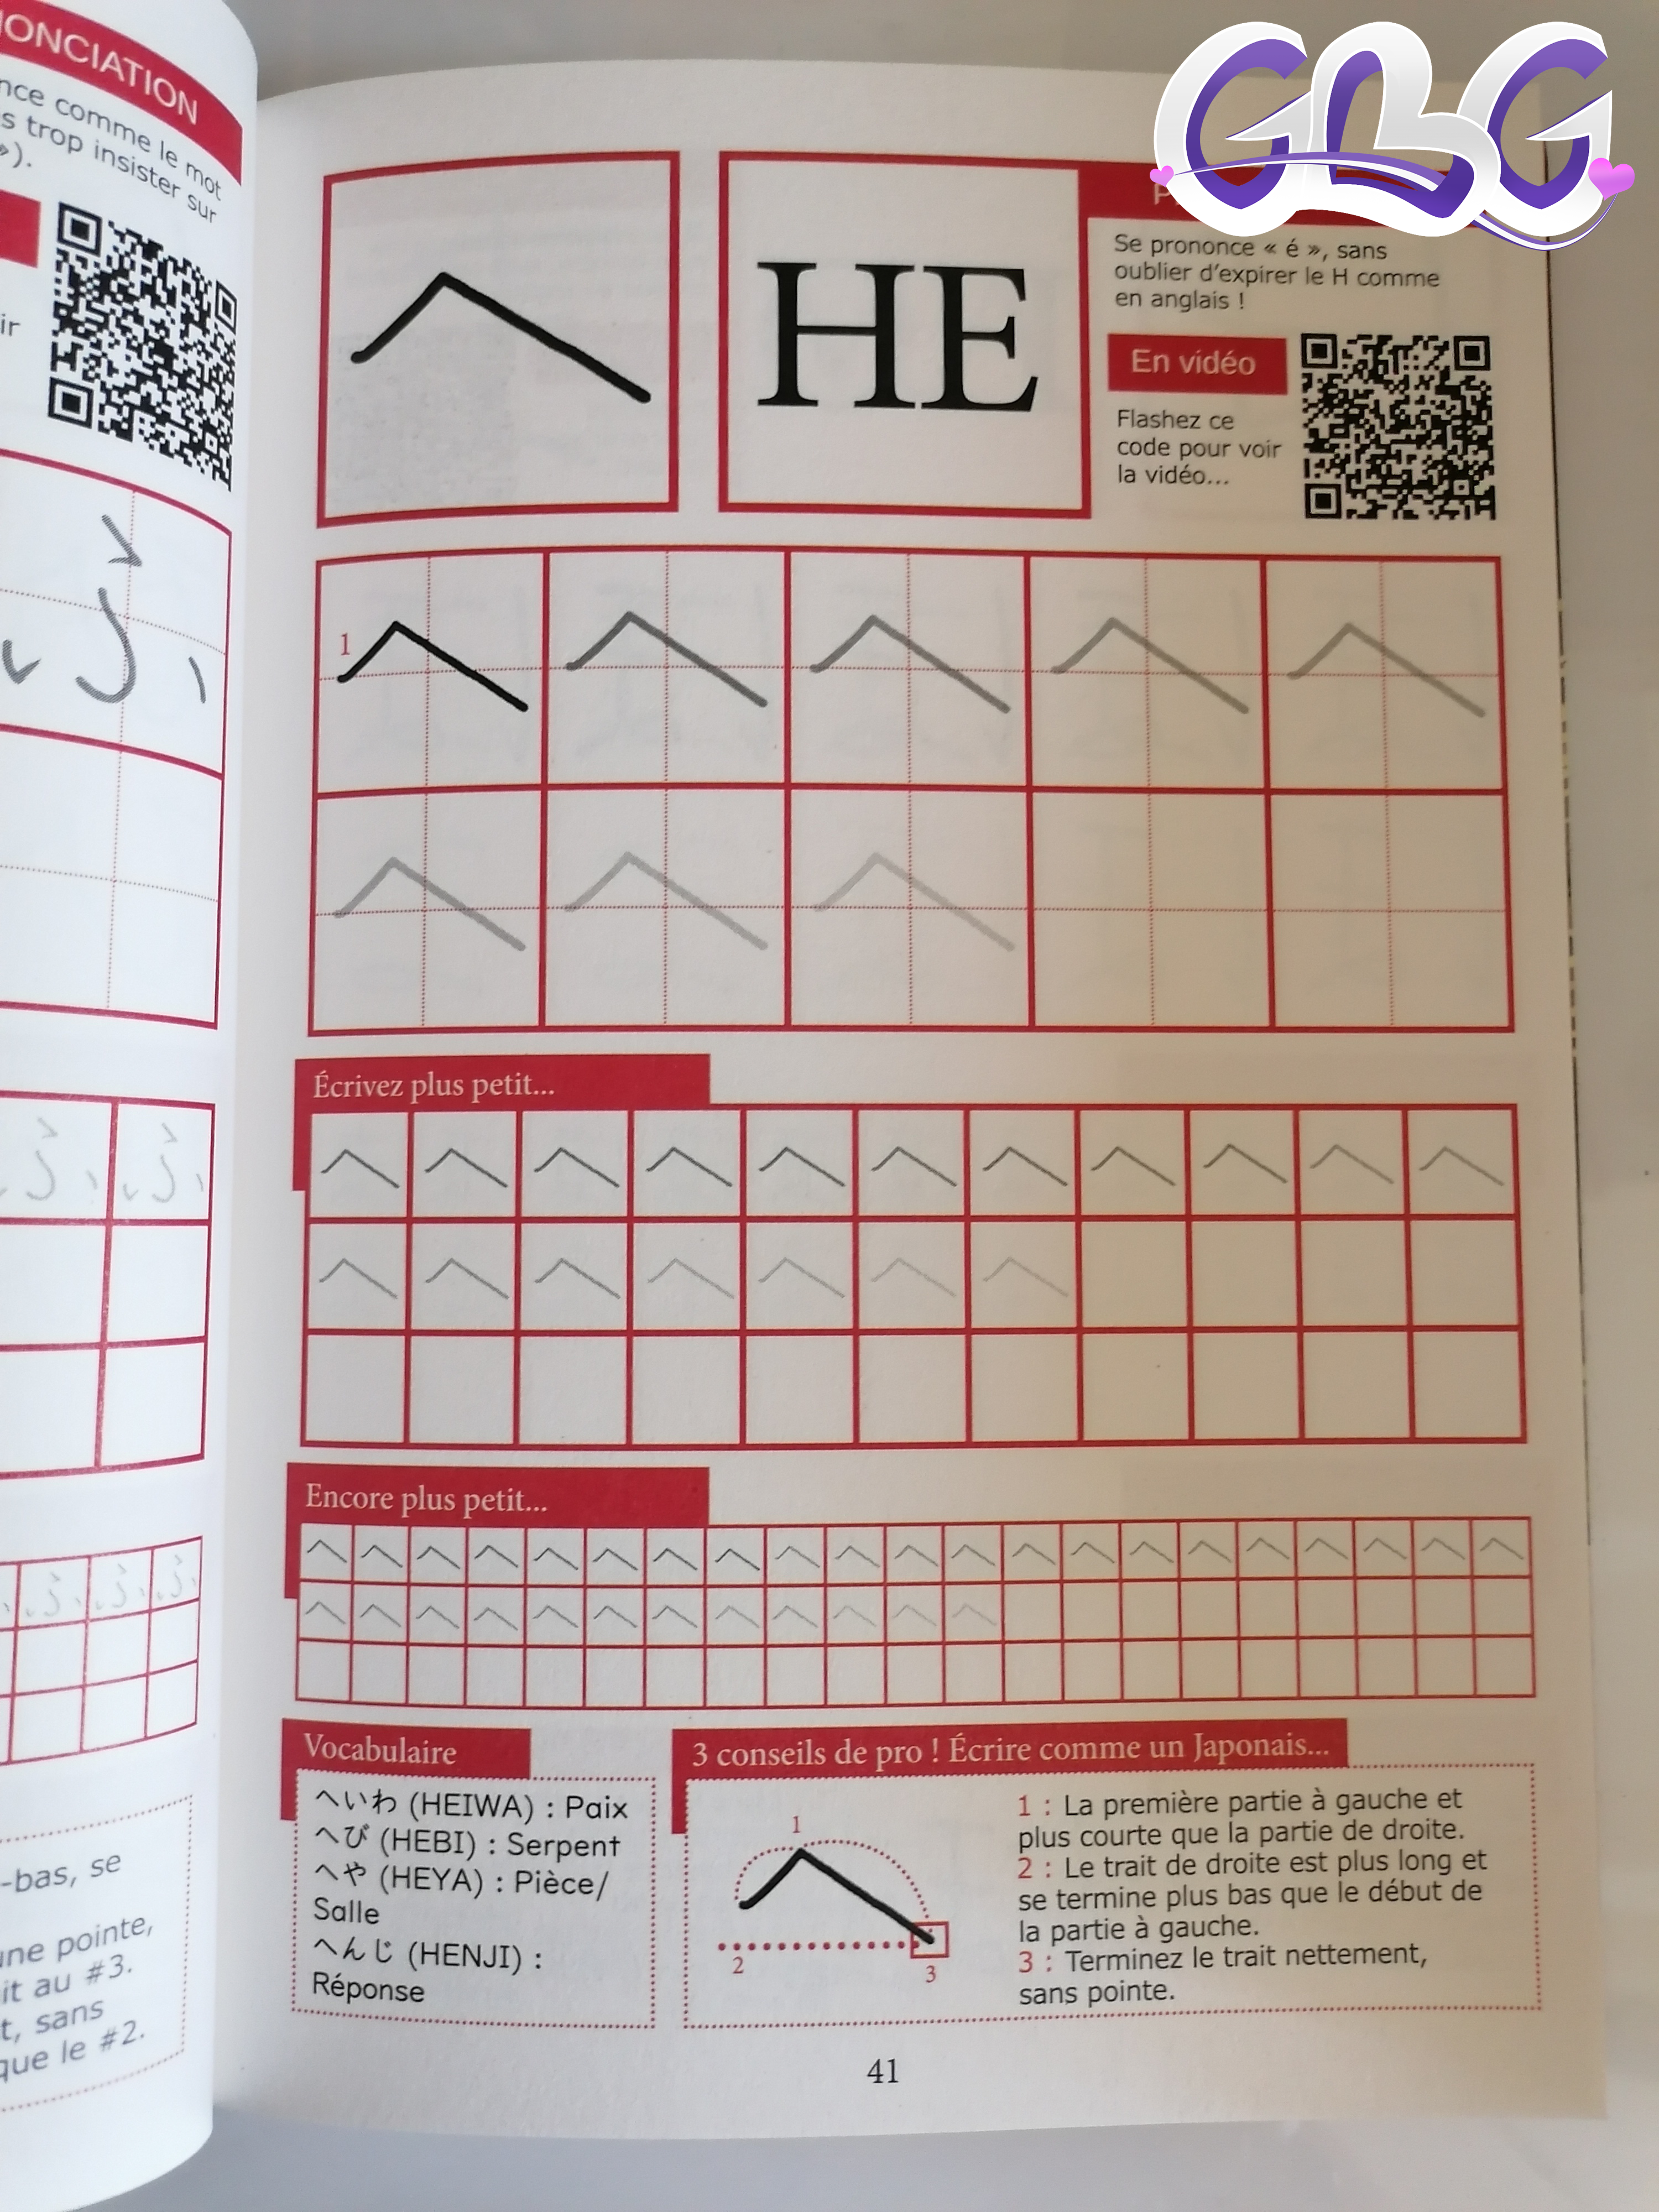 Exemple d'une page "hiragana"